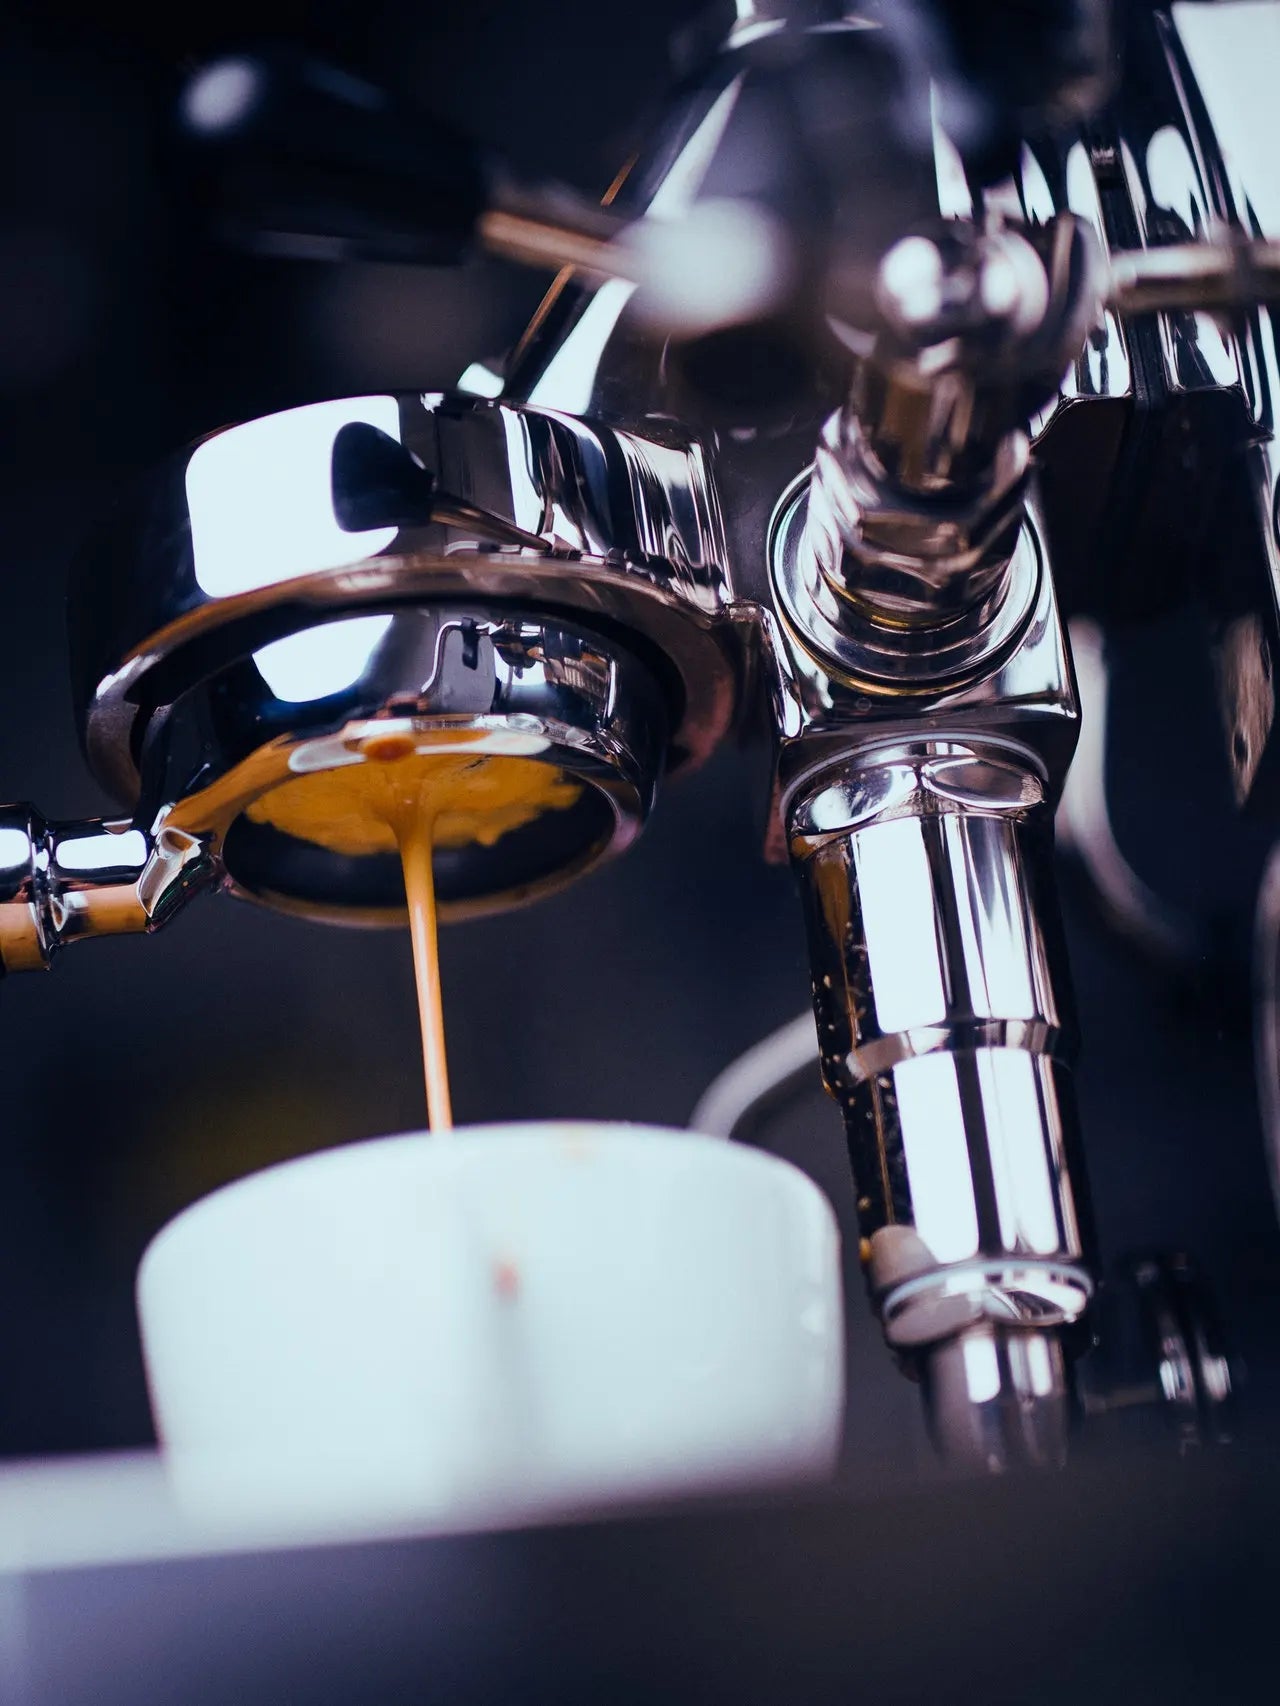 Espresso vs Coffee: What's the difference?